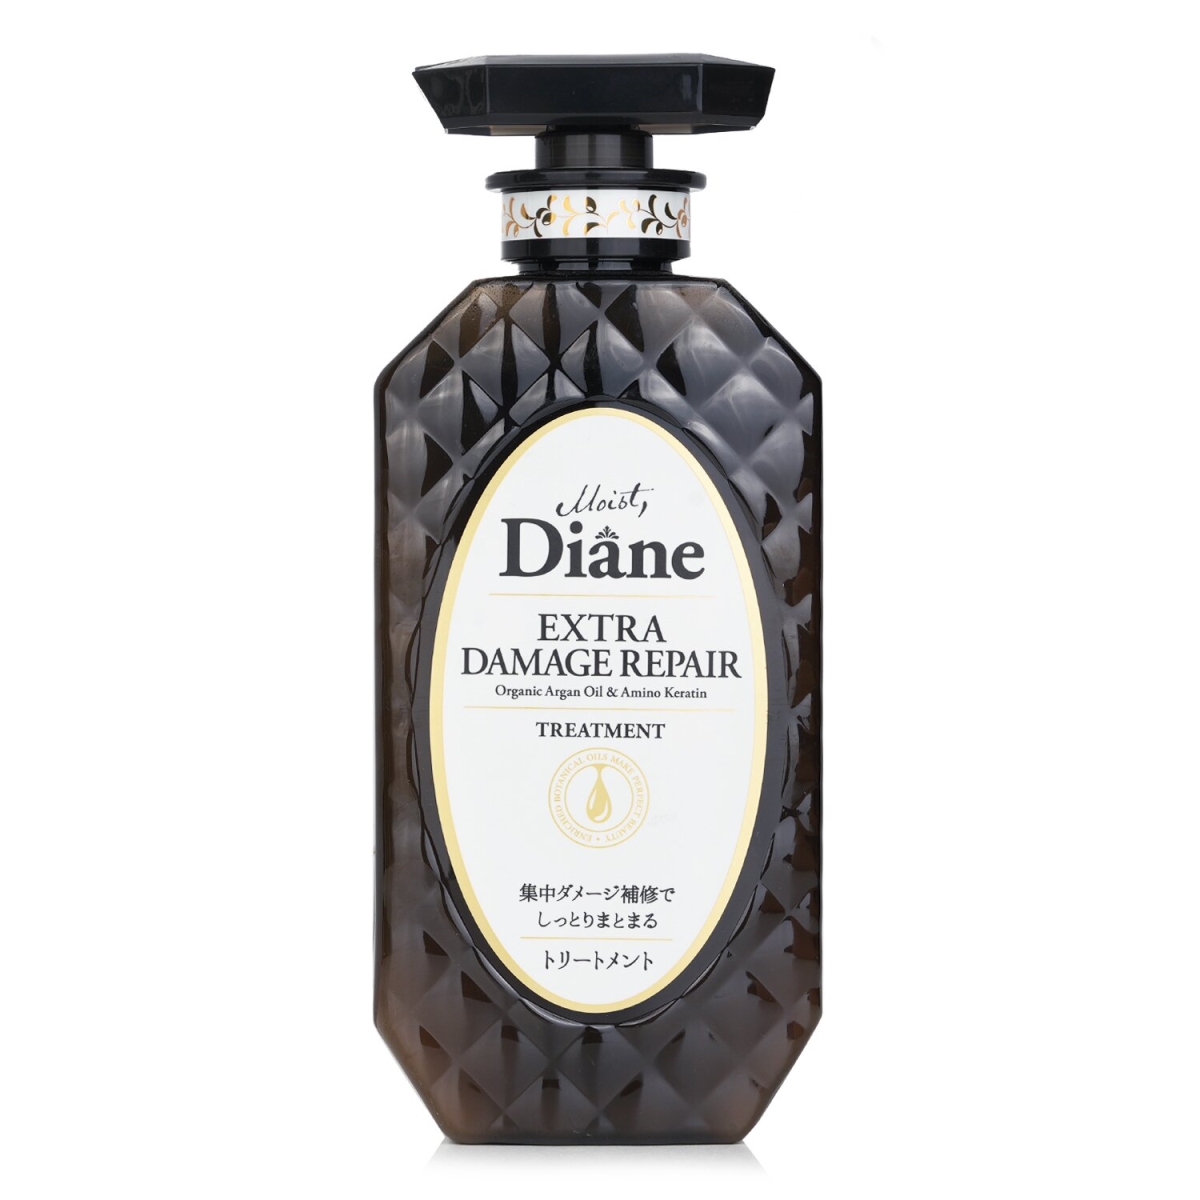 Picture of Moist Diane 304171 450 ml Extra Damage Repair Treatment